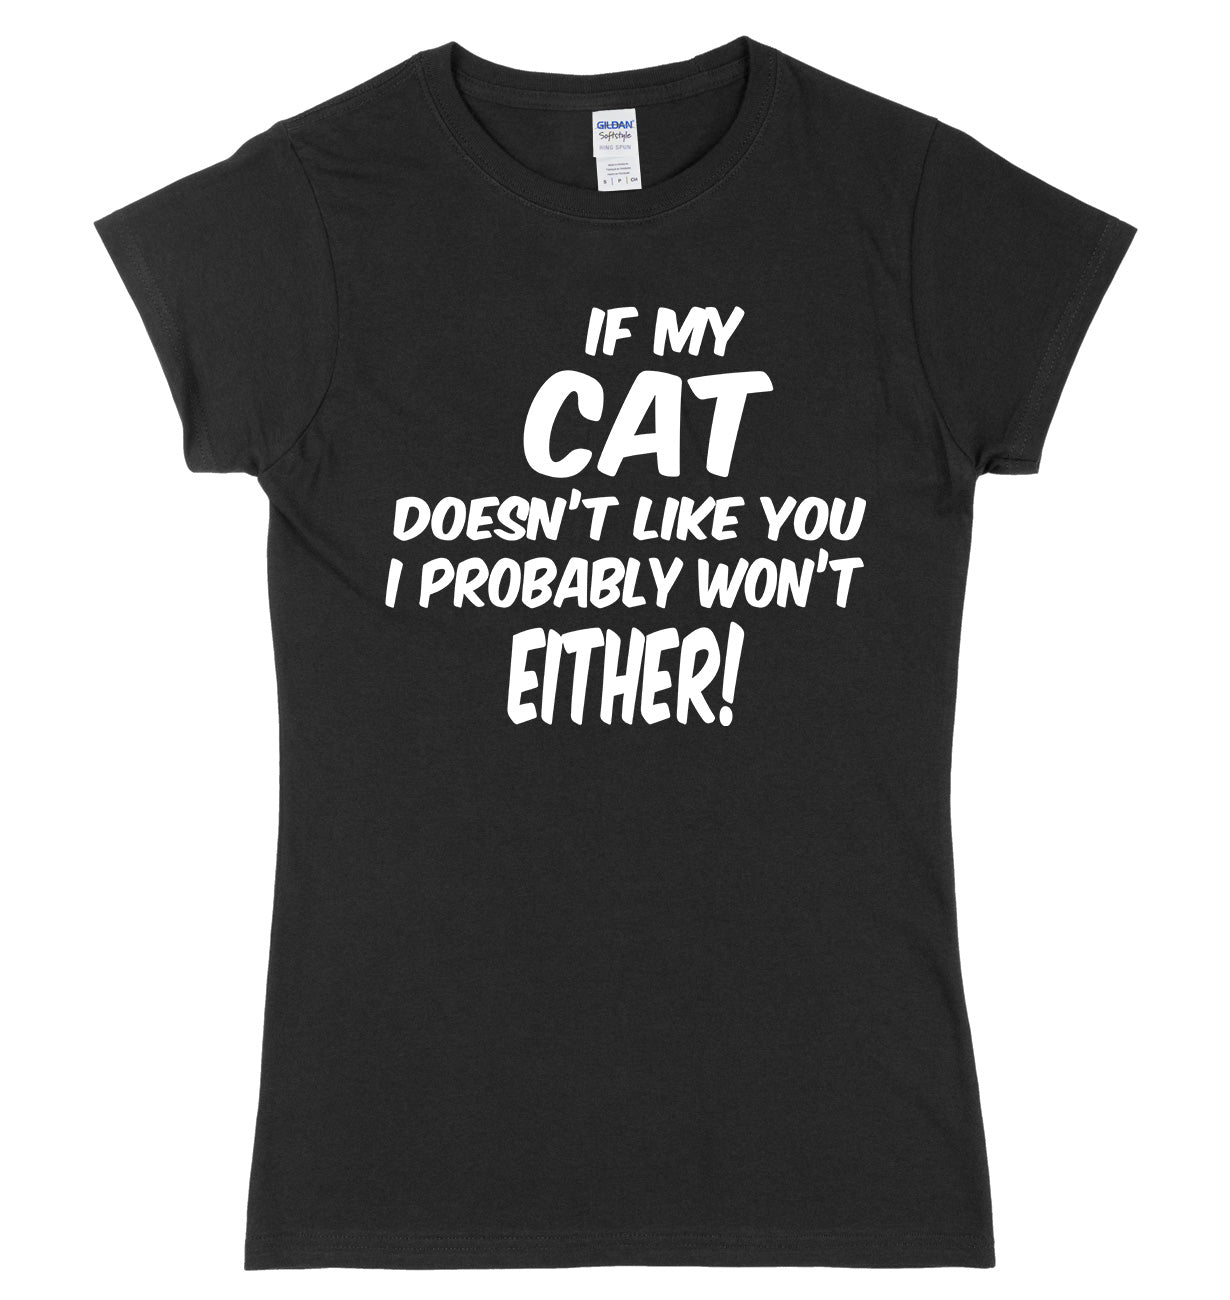 IF MY CAT DOESN'T LIKE YOU I PROBABLY WON'T EITHER FUNNY WOMENS LADIES SLIM FIT  T-SHIRT